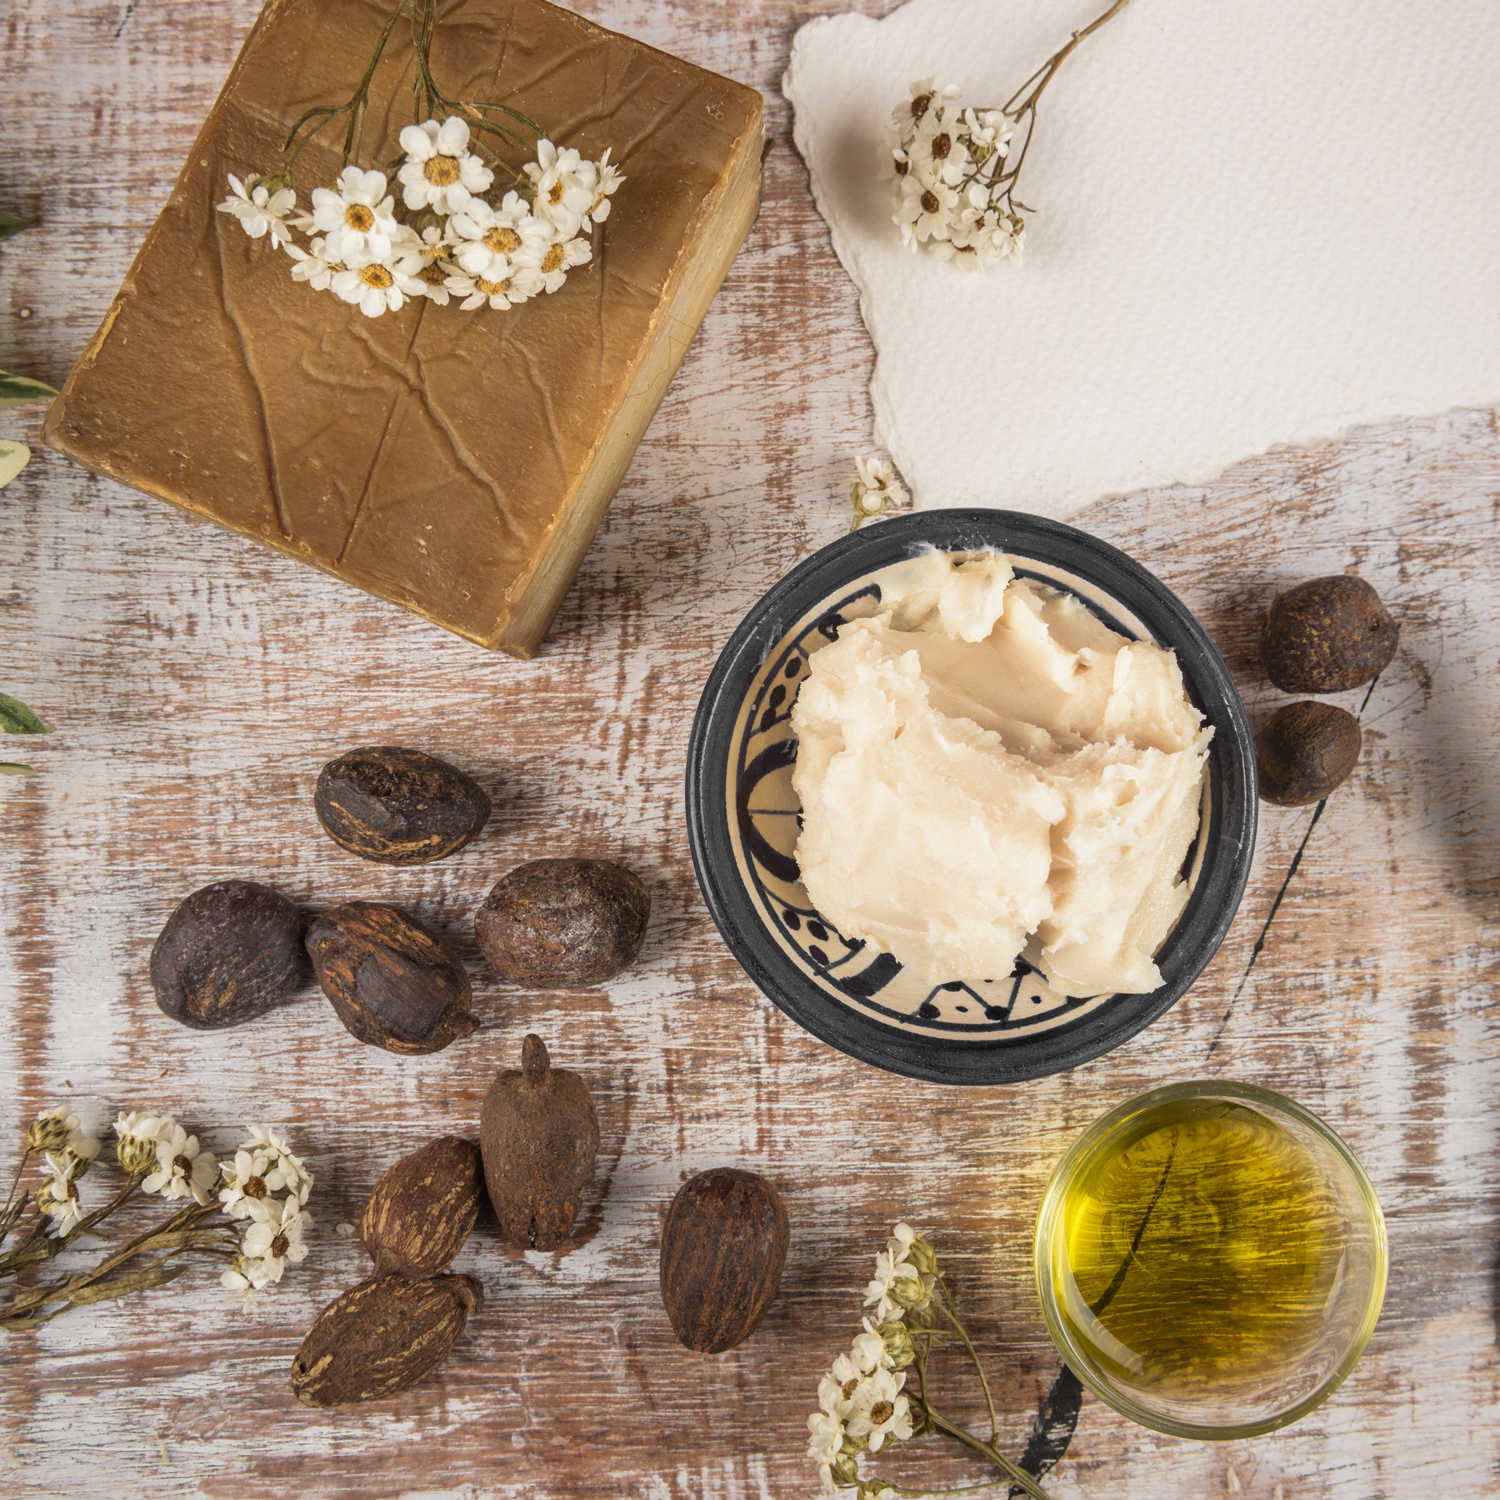 Photo of our natural skincare ingredients including shea butter and oil